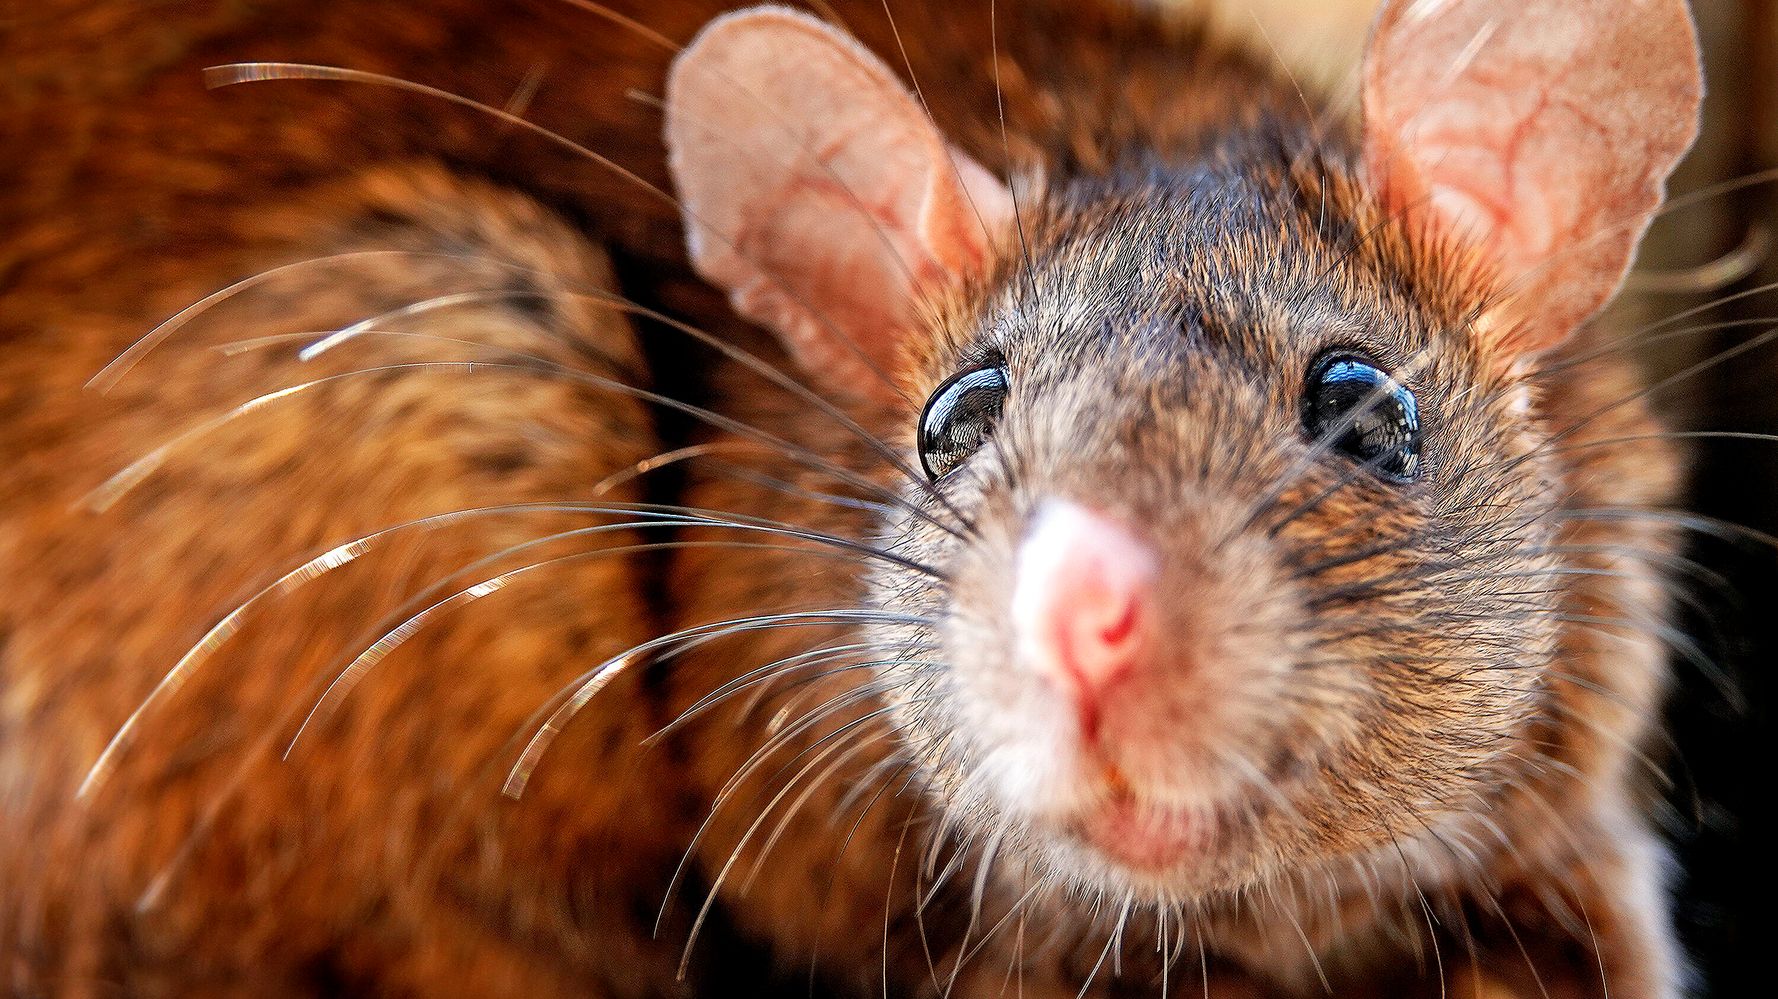 Images of the massive plague of mice in Australia will haunt your nightmares